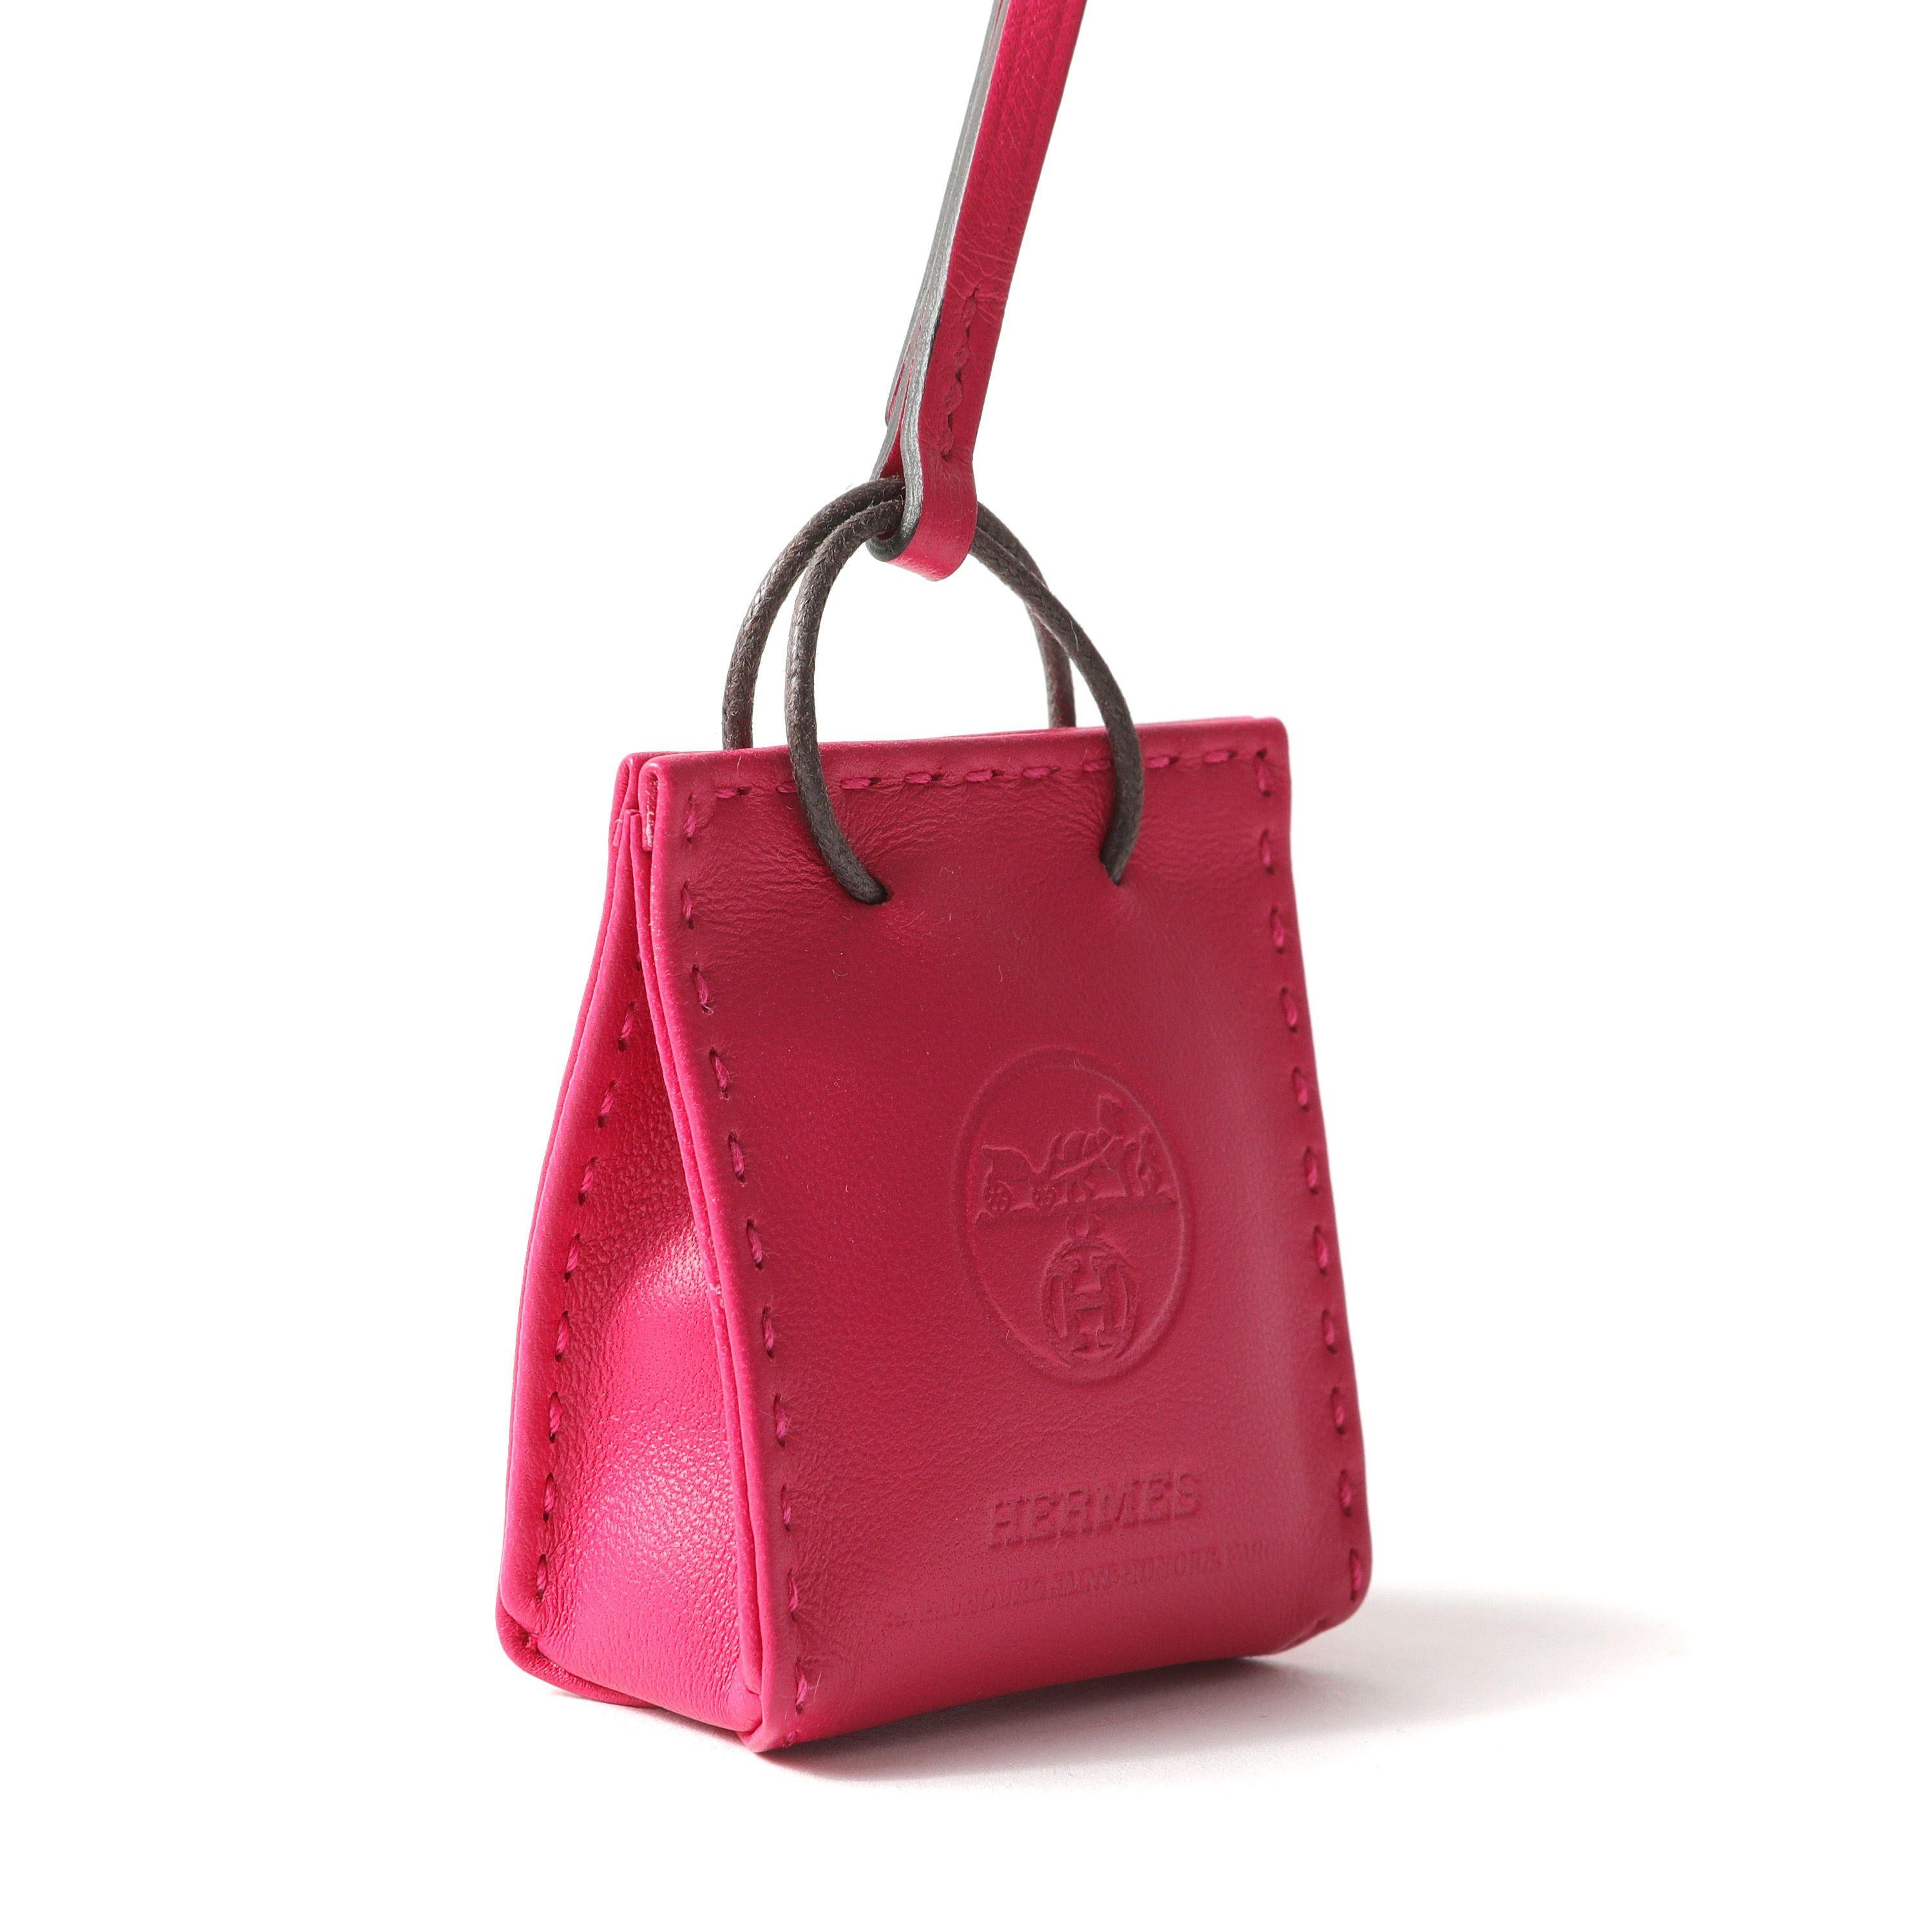 This authentic Hermès Pink Shopping Bag Charm is in pristine condition. Hot pink leather H embossed tiny shopping bag. Box included.

PBF 12252